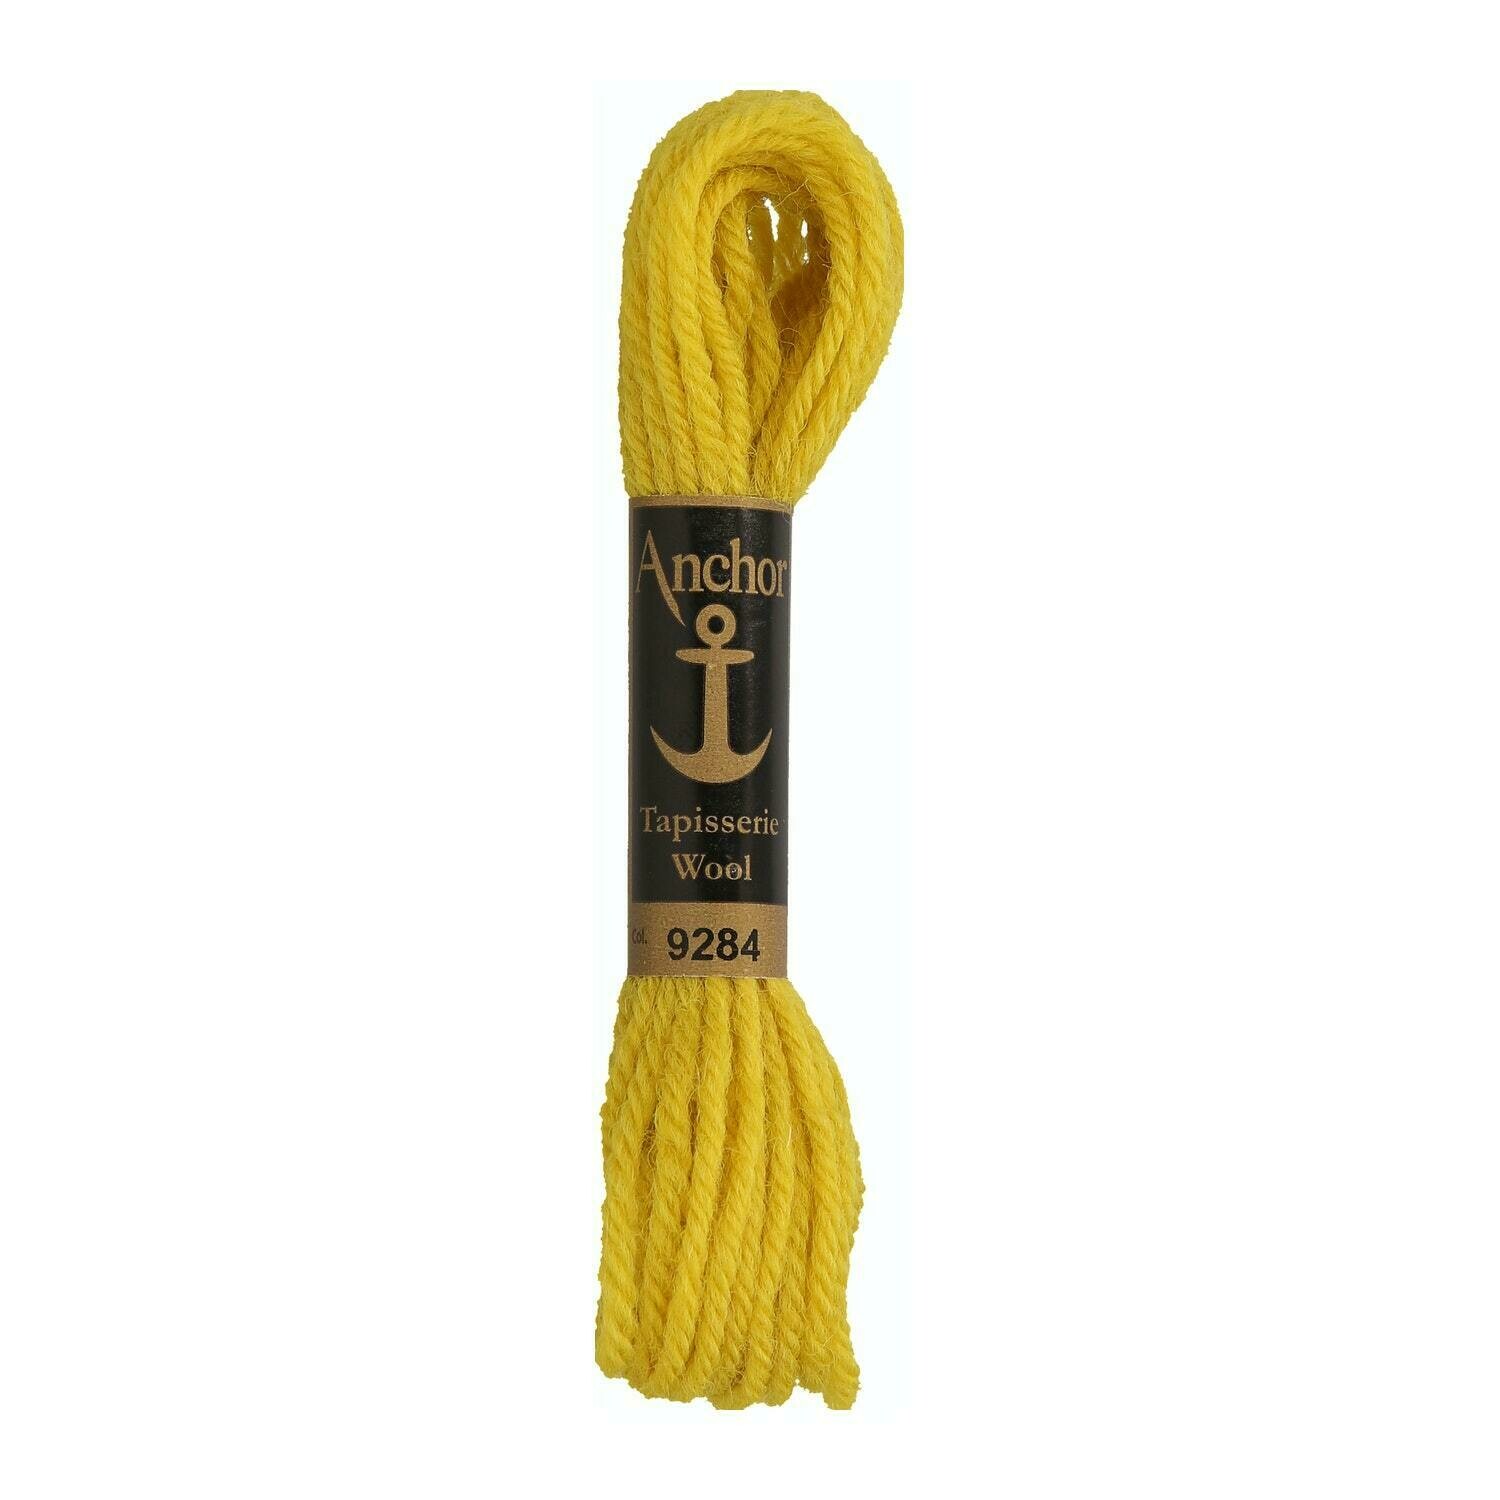 Anchor Tapisserie Wool #09284